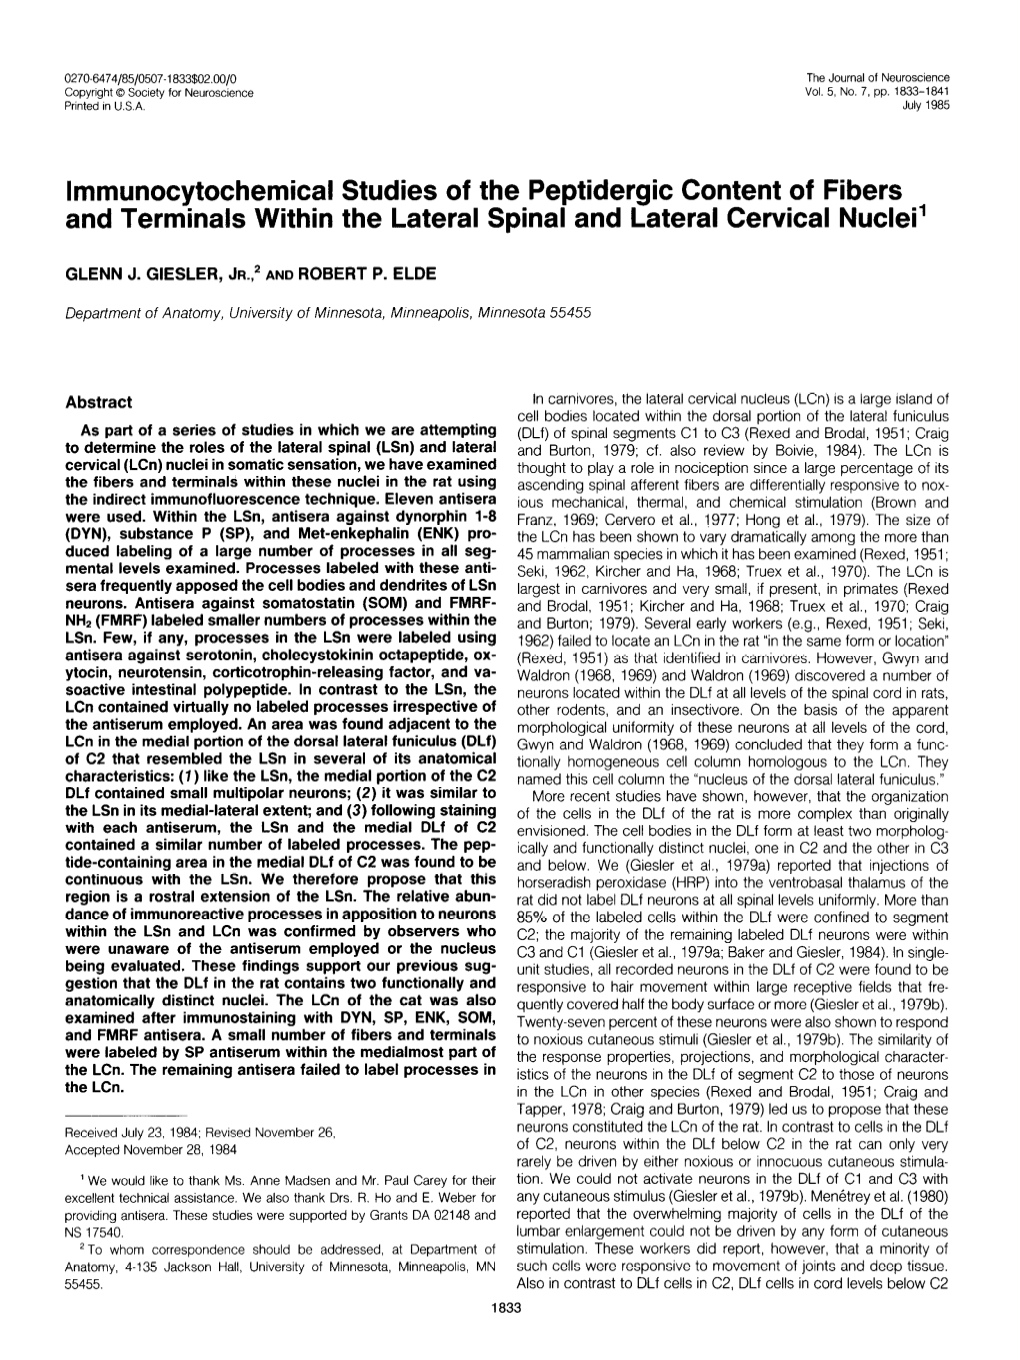 Lmmunocytochemical Studies of the Peptidergic Content of Fibers and Terminals Within the Lateral Spinal and Lateral Cervical Nuclei’